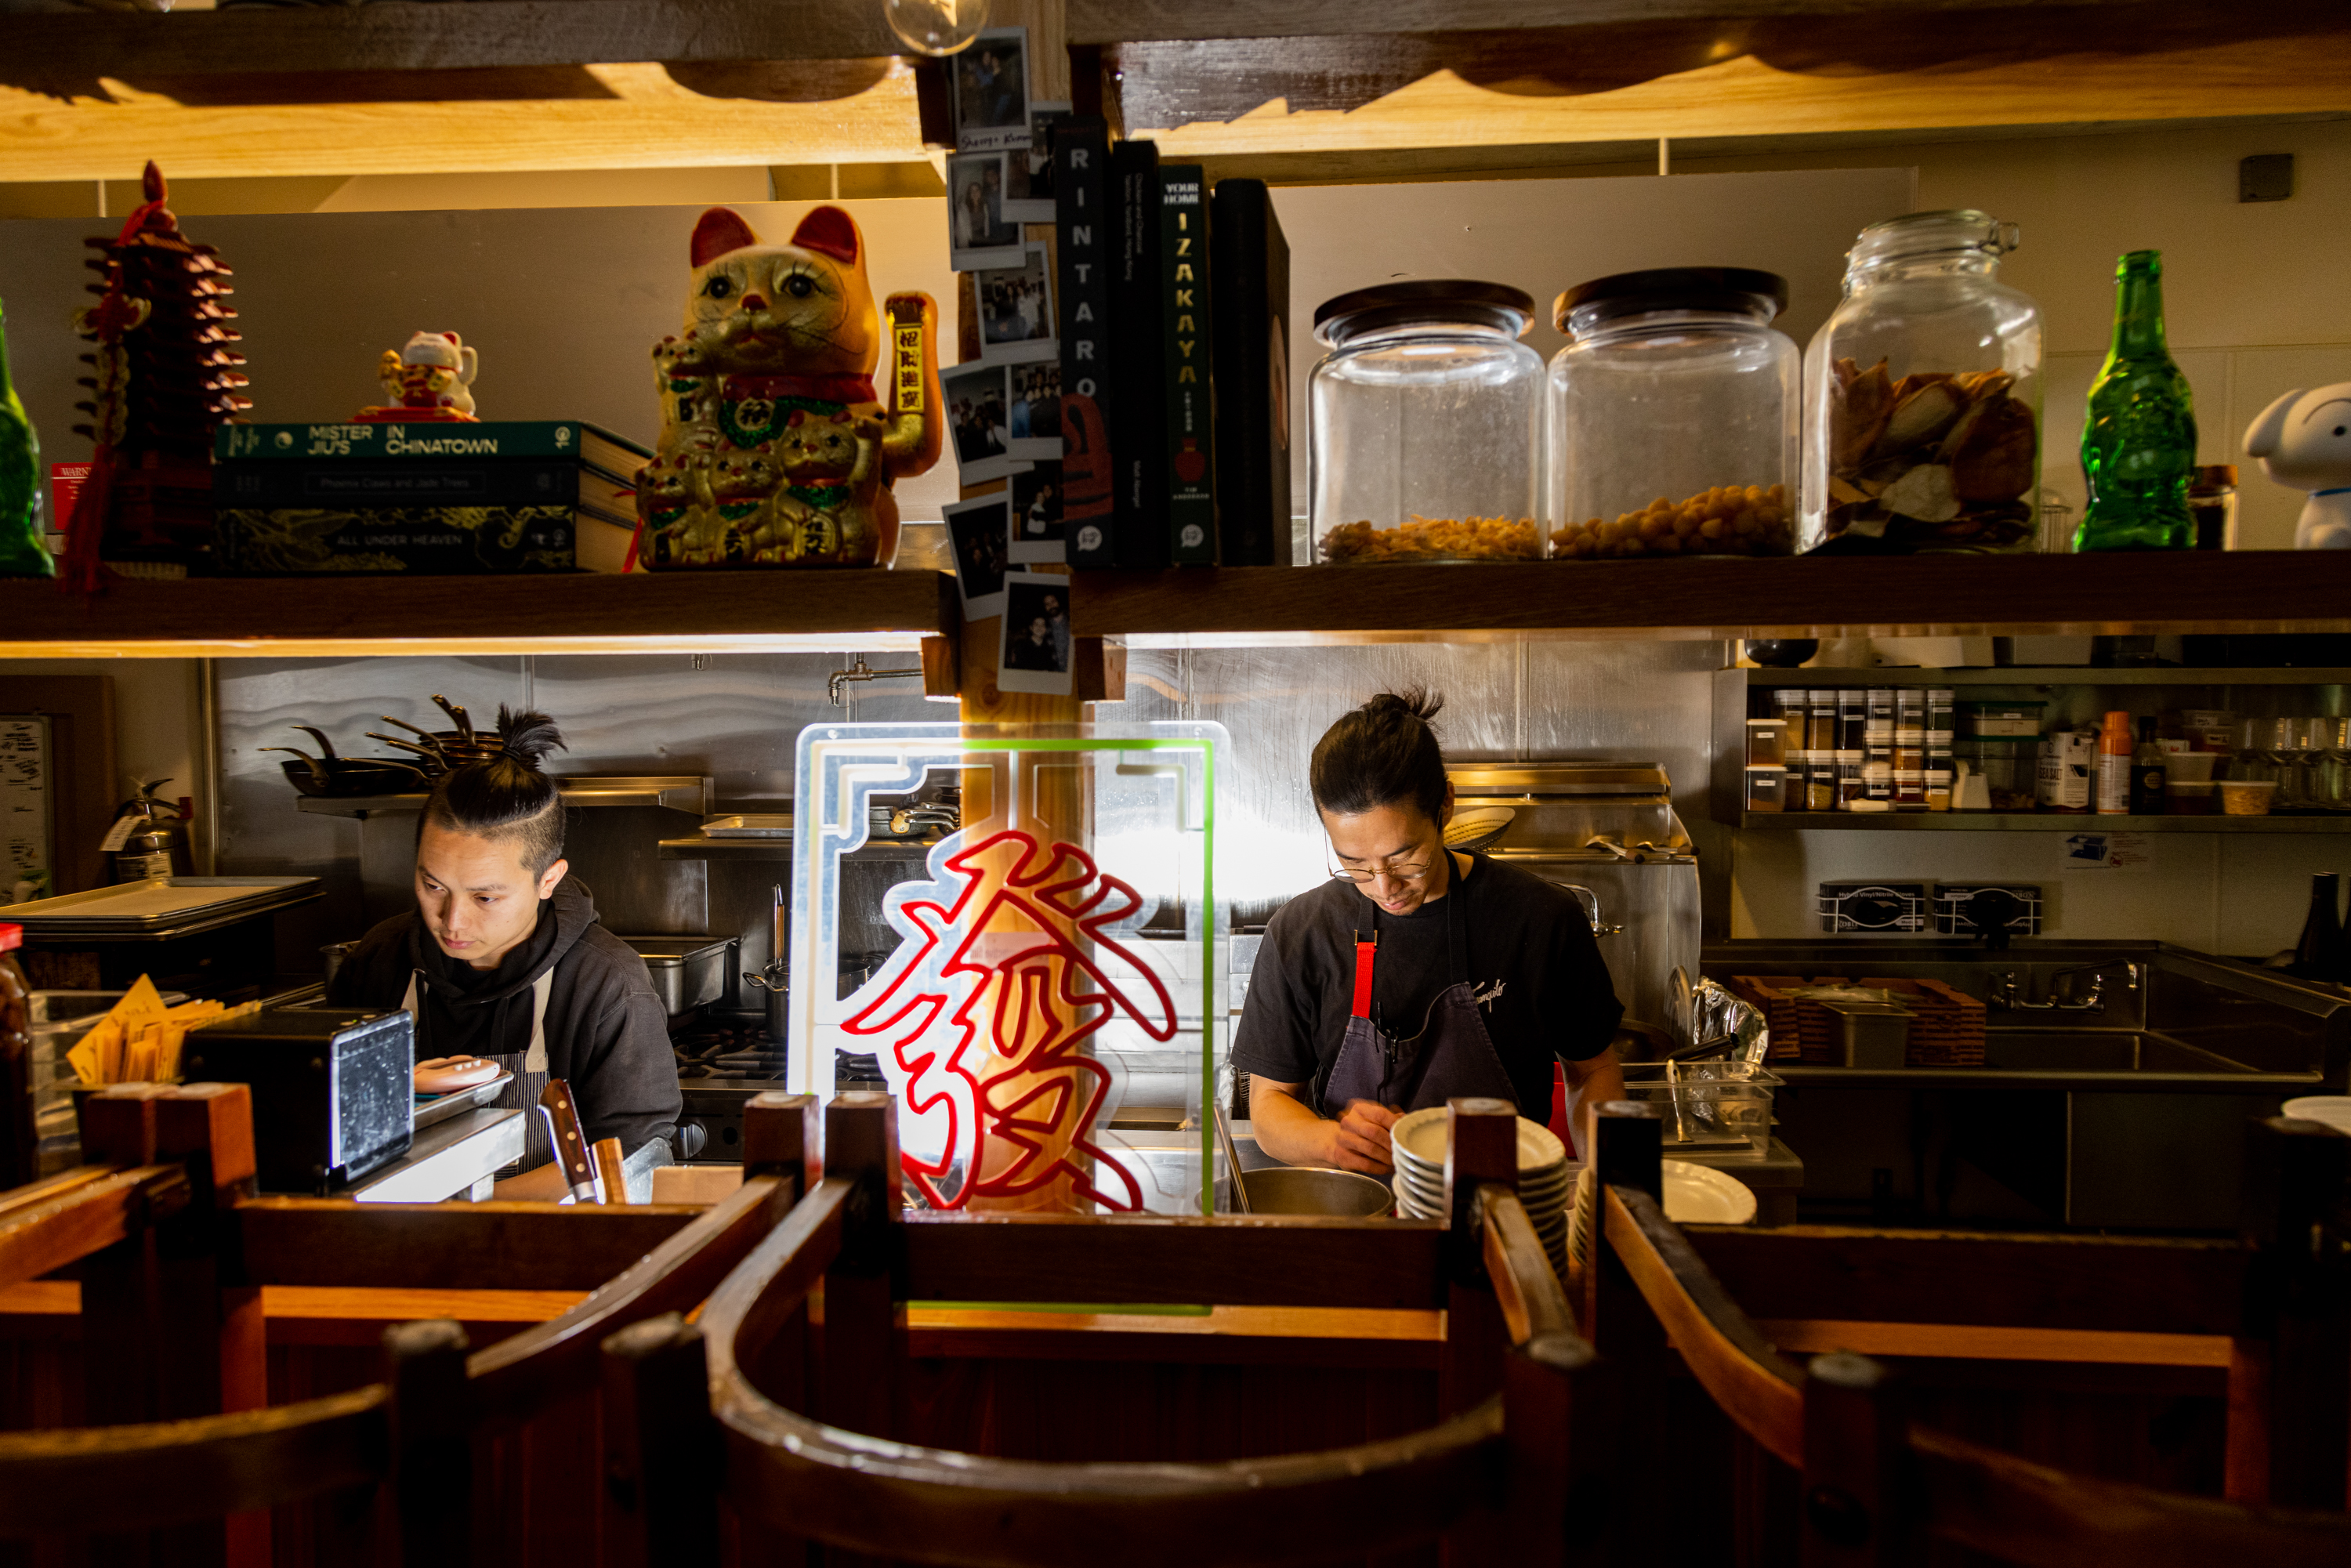 Two people working in a cozy, dimly lit Asian restaurant with cultural decorations and a neon sign.